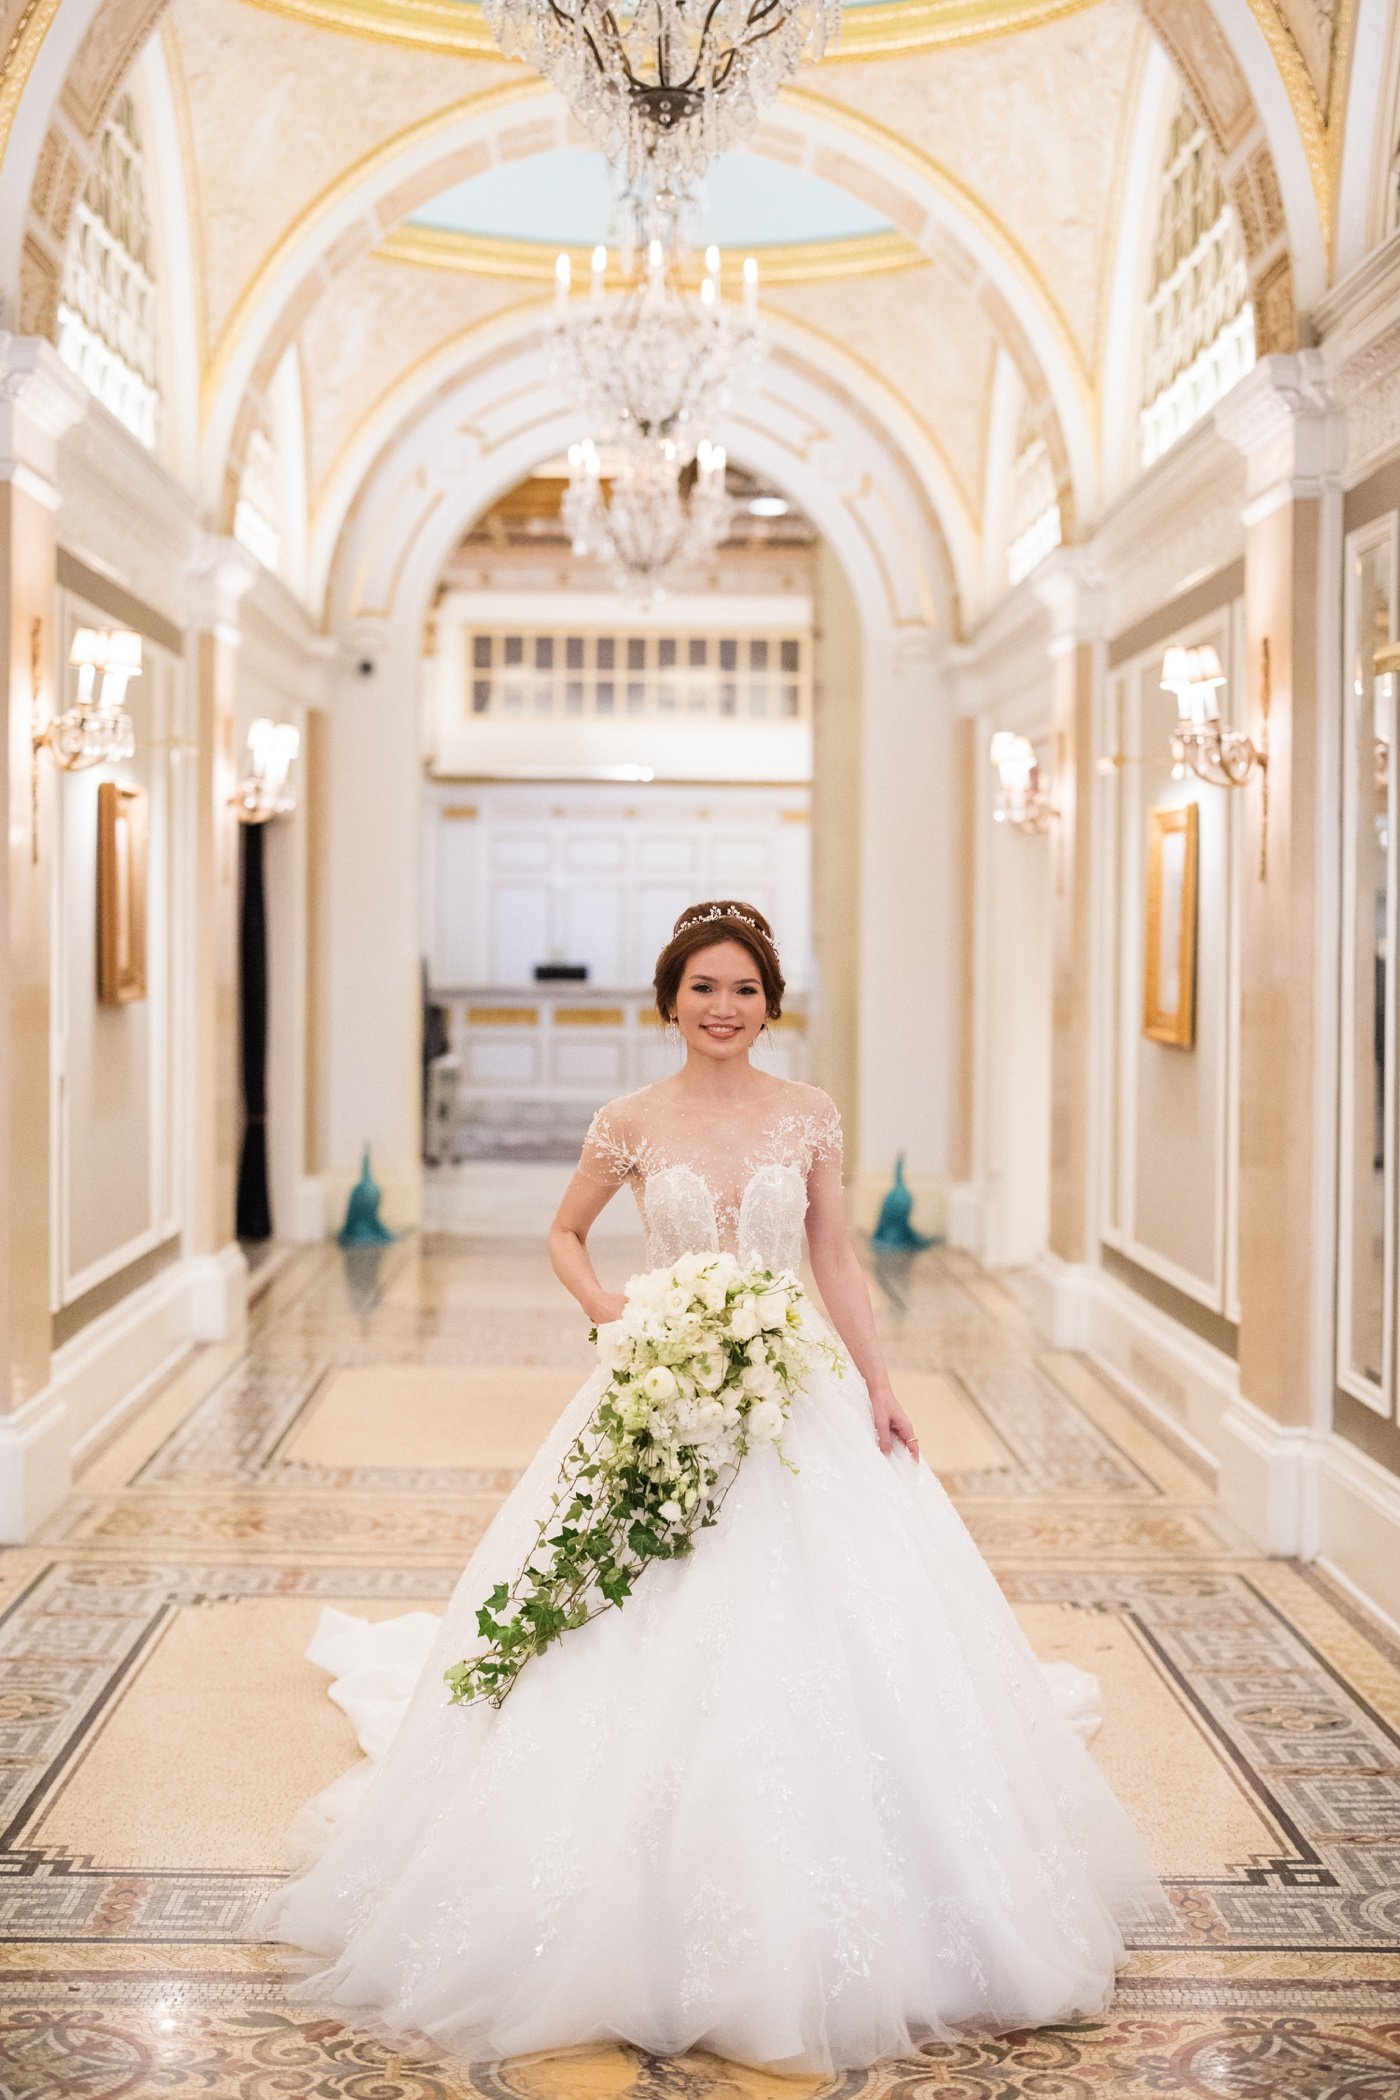 Bride carrying a bouquet of white roses, snapdragon, and ivy by Flou(-e)r Specialty Floral Events